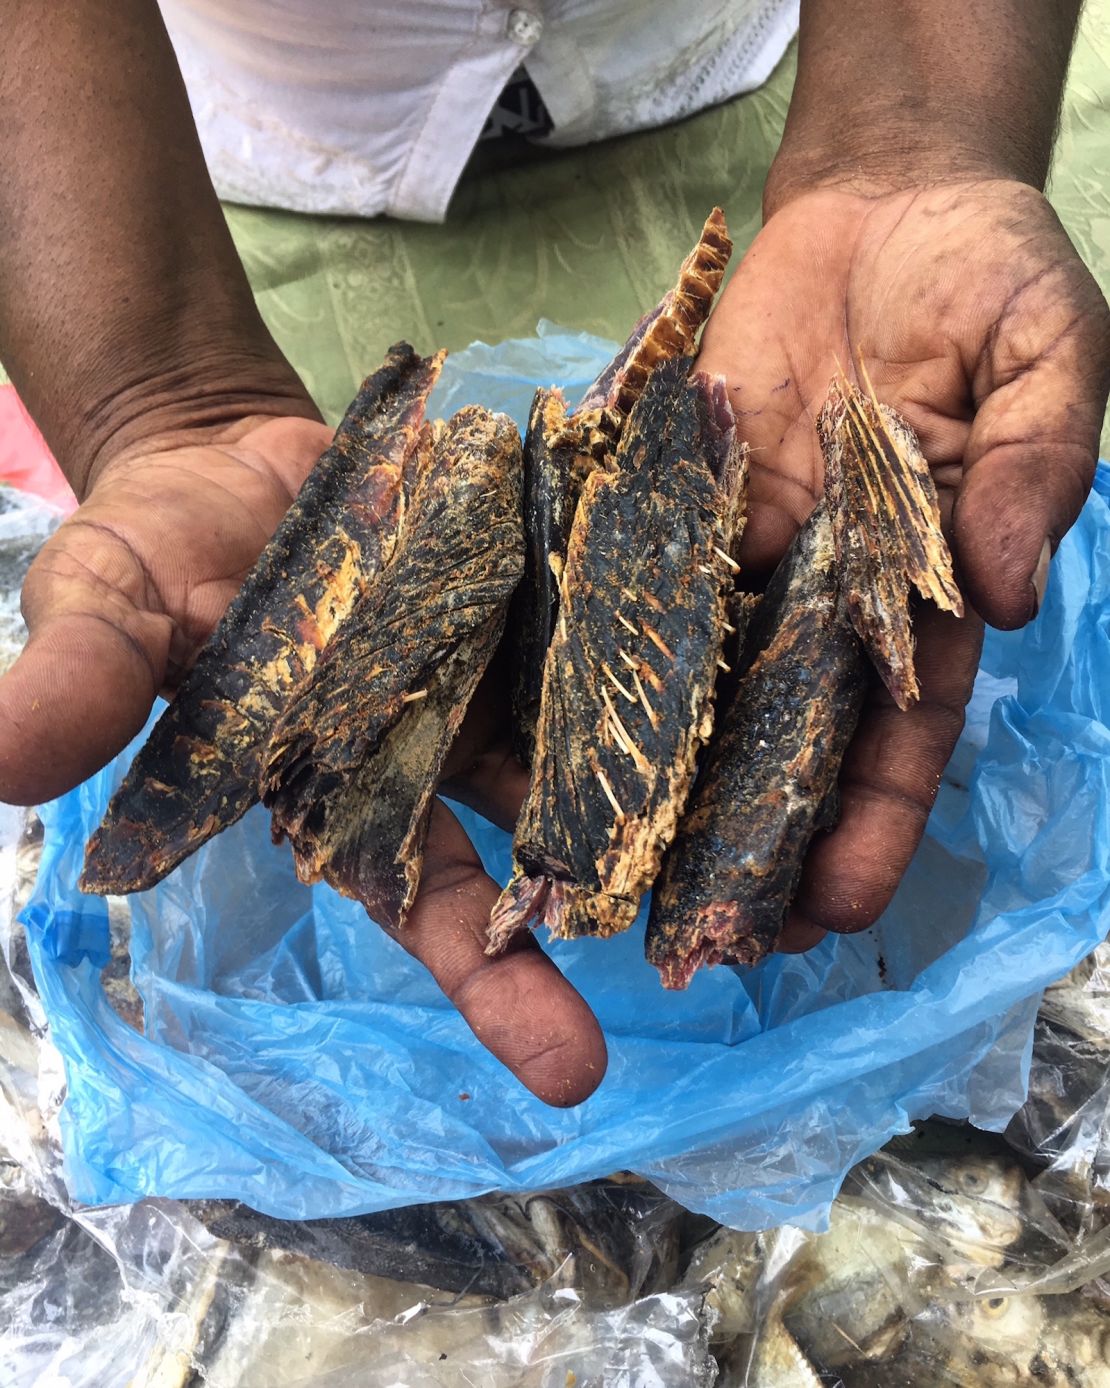 Loan recipient selling dried fish at market in Chilaw